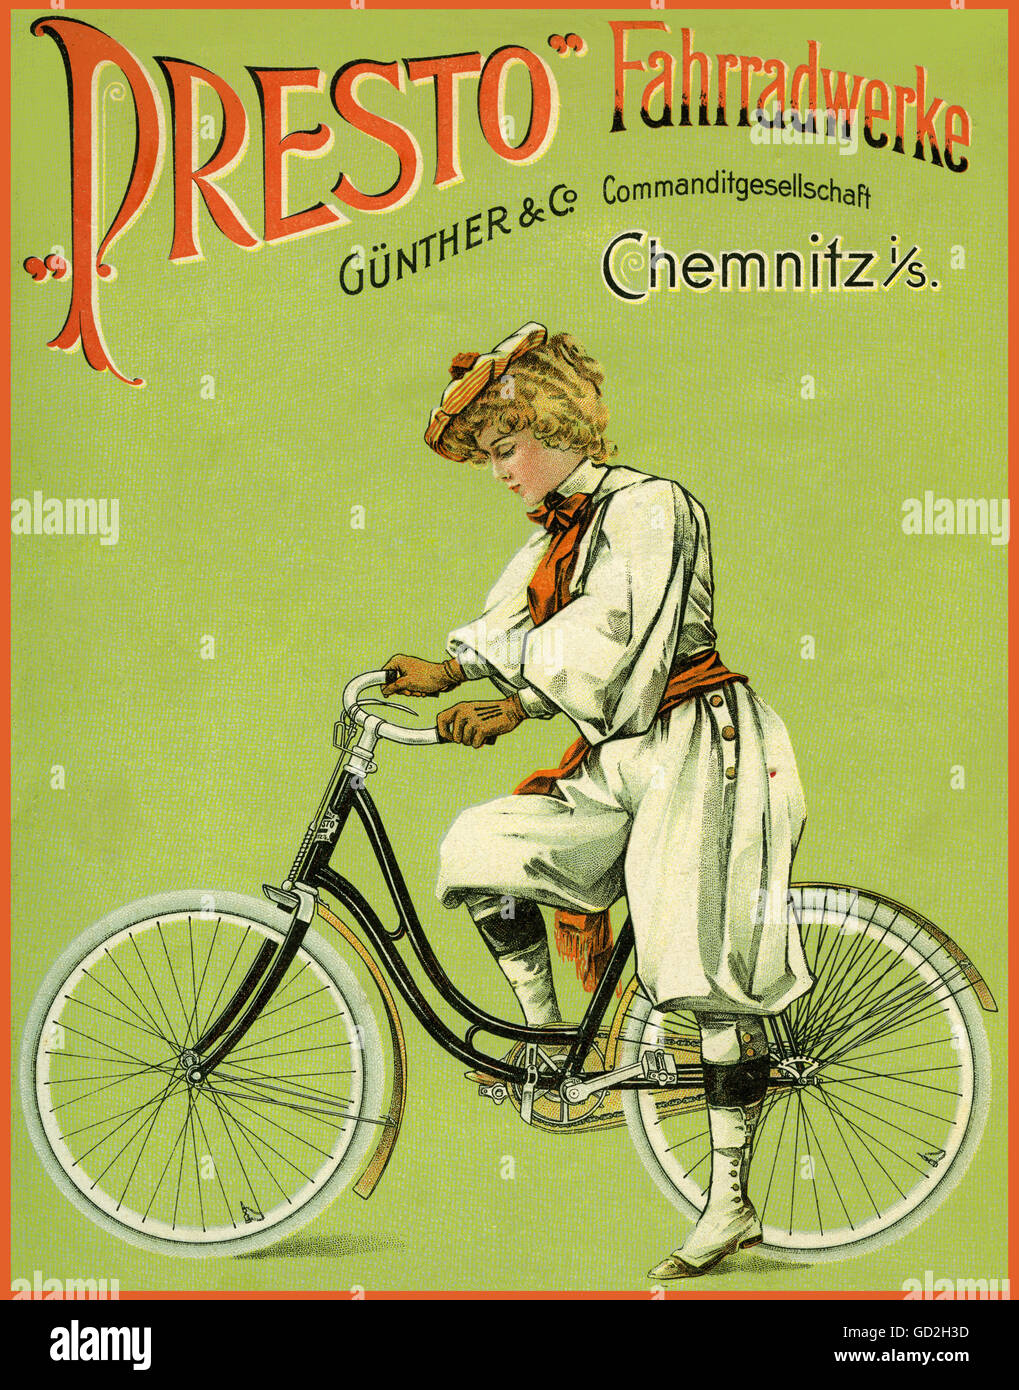 advertising,bicycle advertising,for the Presto bicycle plants,Guenther & Co. limited commercial partnership,Chemnitz,Saxony,founded 1895,lithograph,Germany,1899,bicycle advertisement,female bicyclist,woman,women,branded bike,bicycles,bikes,Presto Company,sporty,sporting,sports,sporting dress,leisure time,free time,spare time,leisure wear,casual wear,sports history,cutting out with a pastry wheel,cut out with a pastry wheel,driving,advertising,brand,brands,branded,company,companies,economy,illustration,litho,promotional le,Additional-Rights-Clearences-Not Available Stock Photo